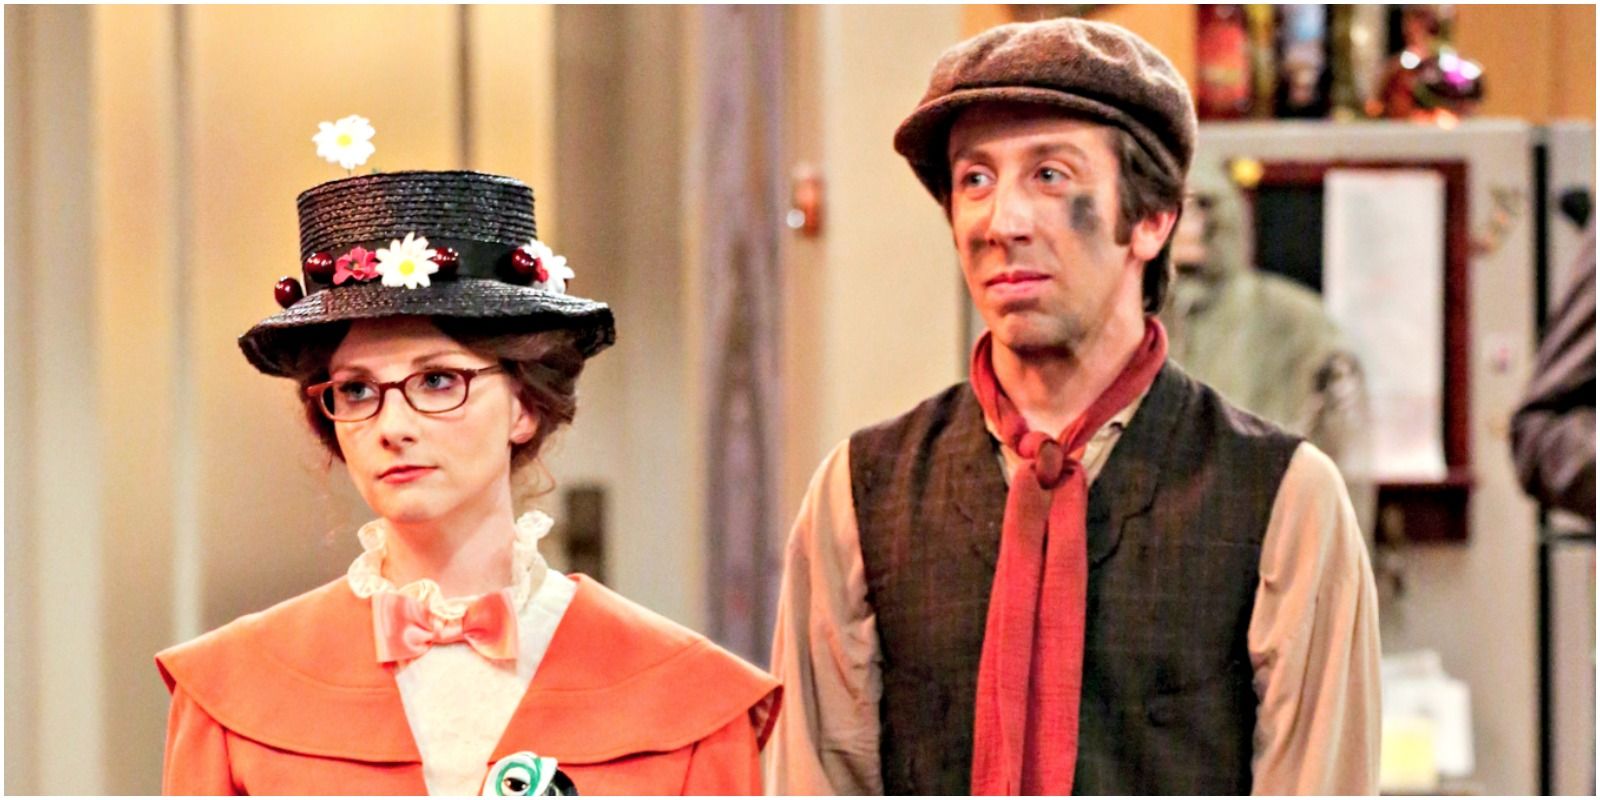 Bernadette and Howard as Mary Poppins and Bert.